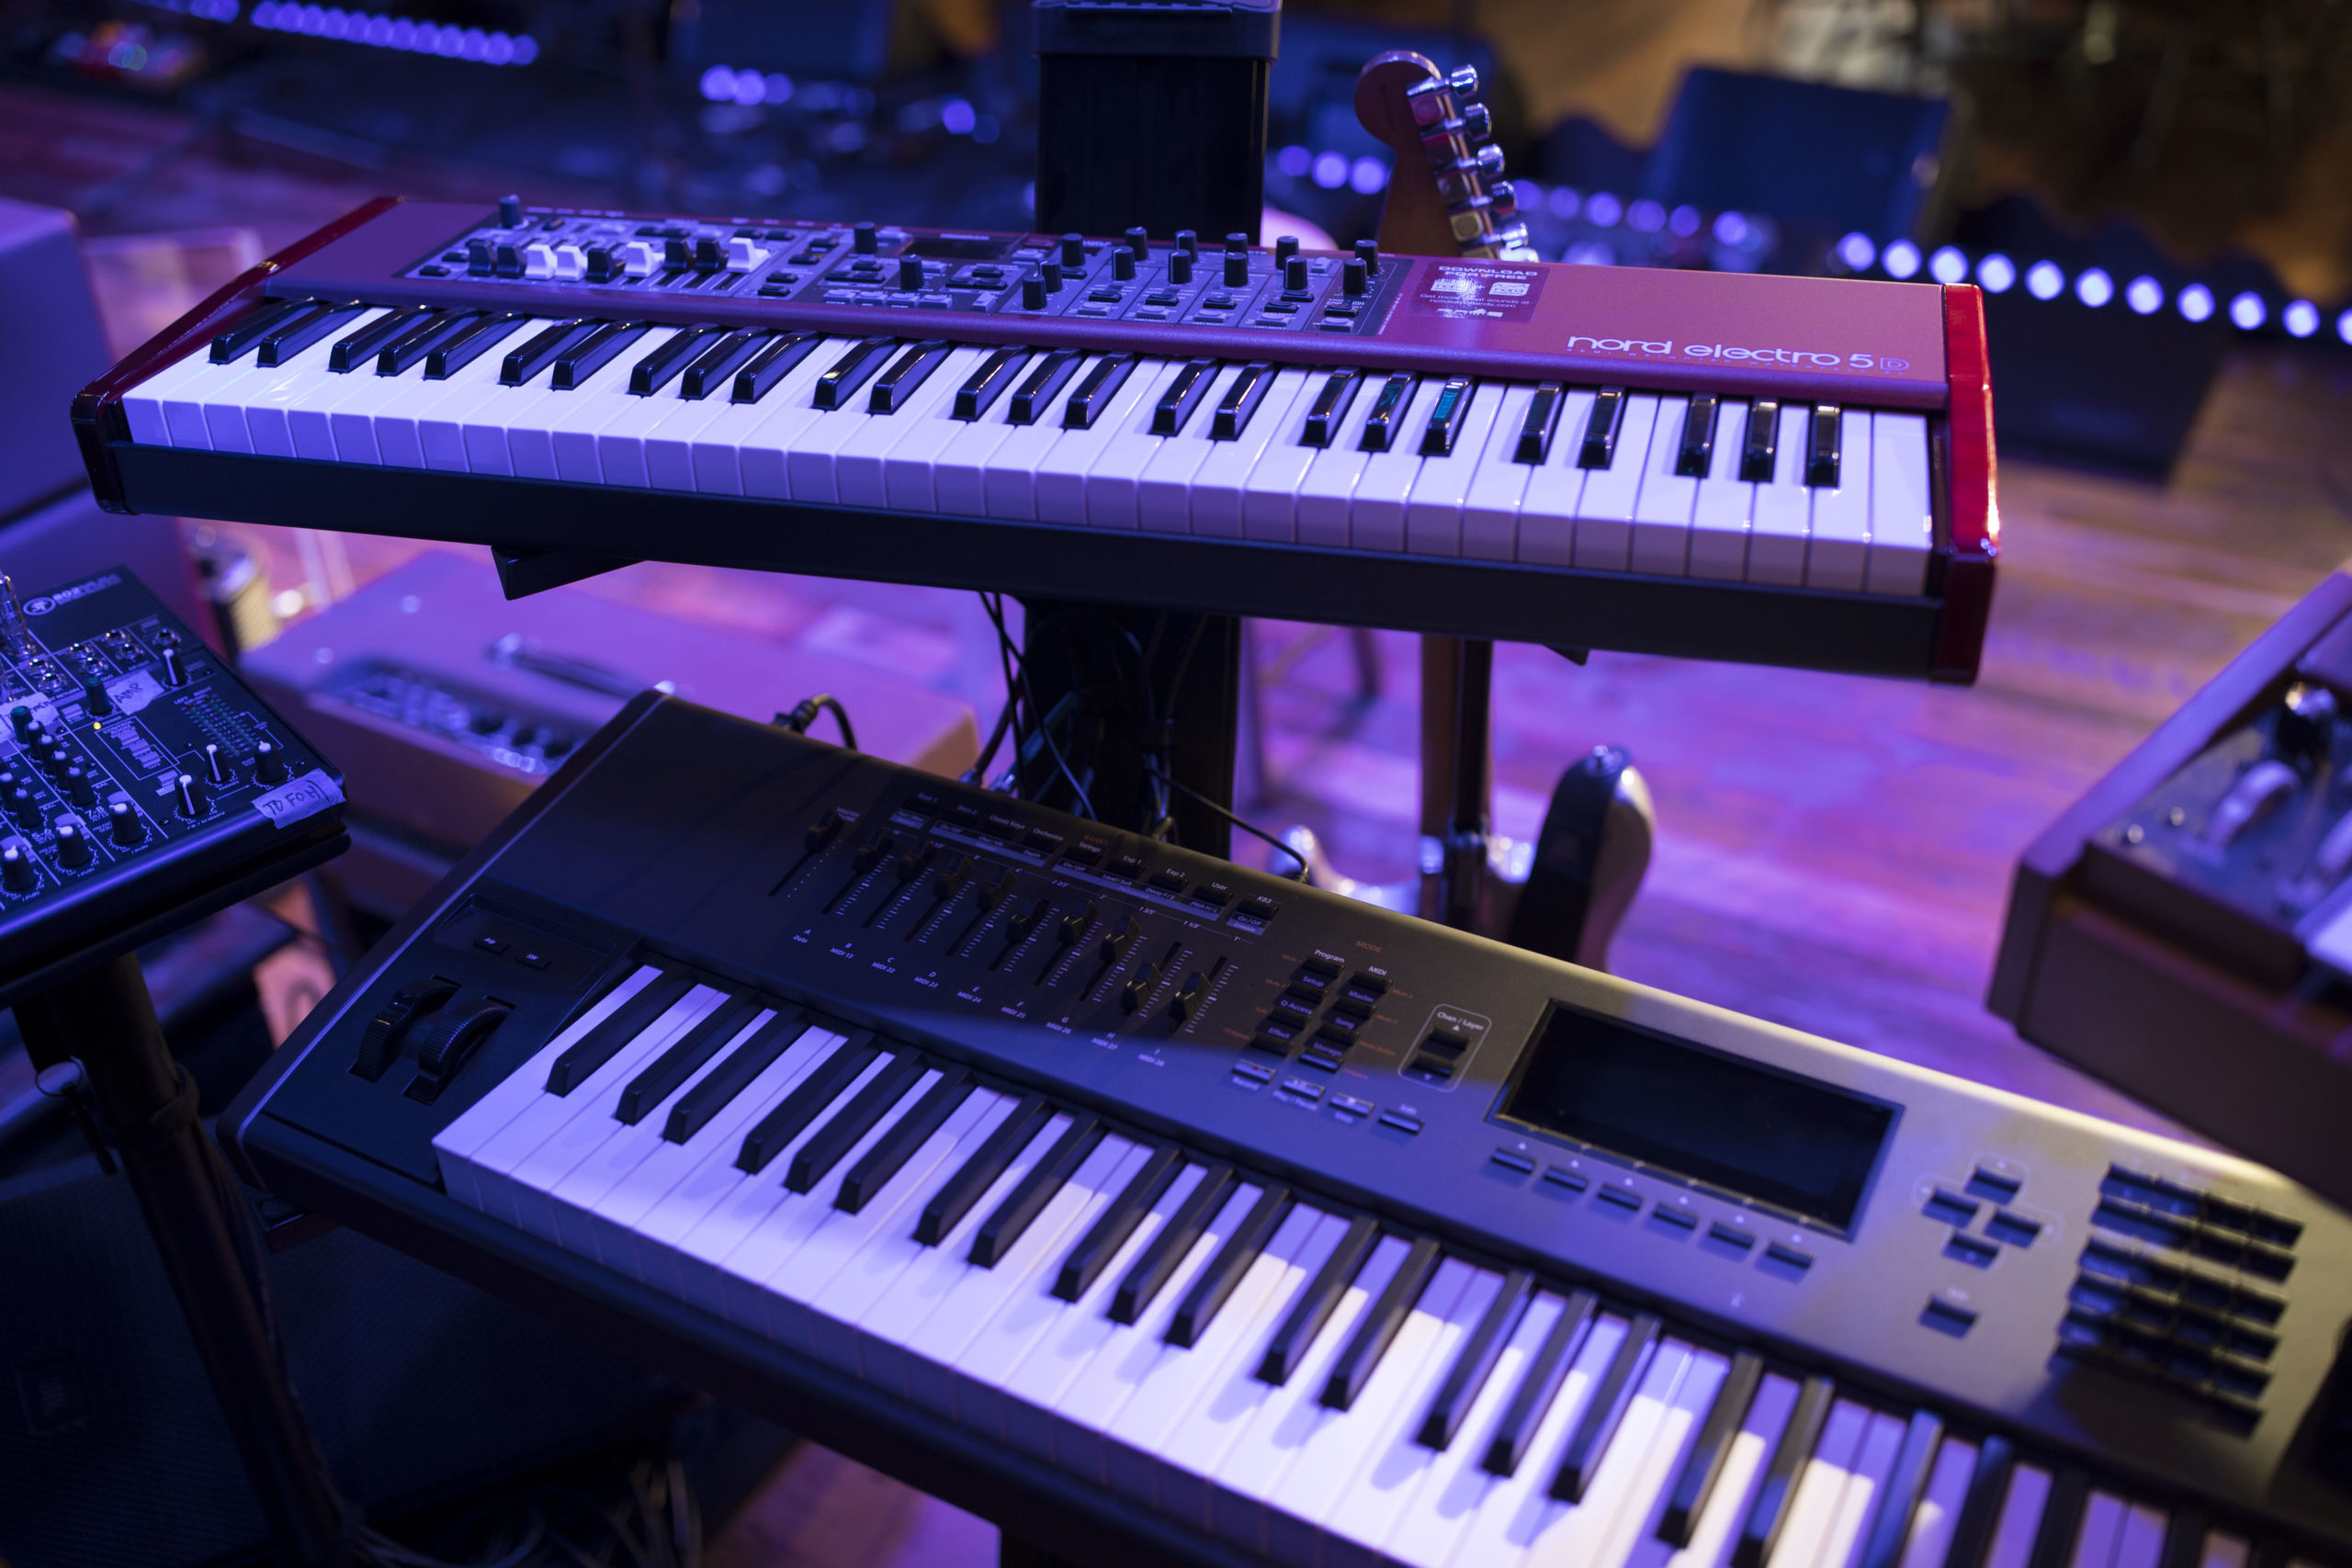 keyboards, live music event, piano, instruments